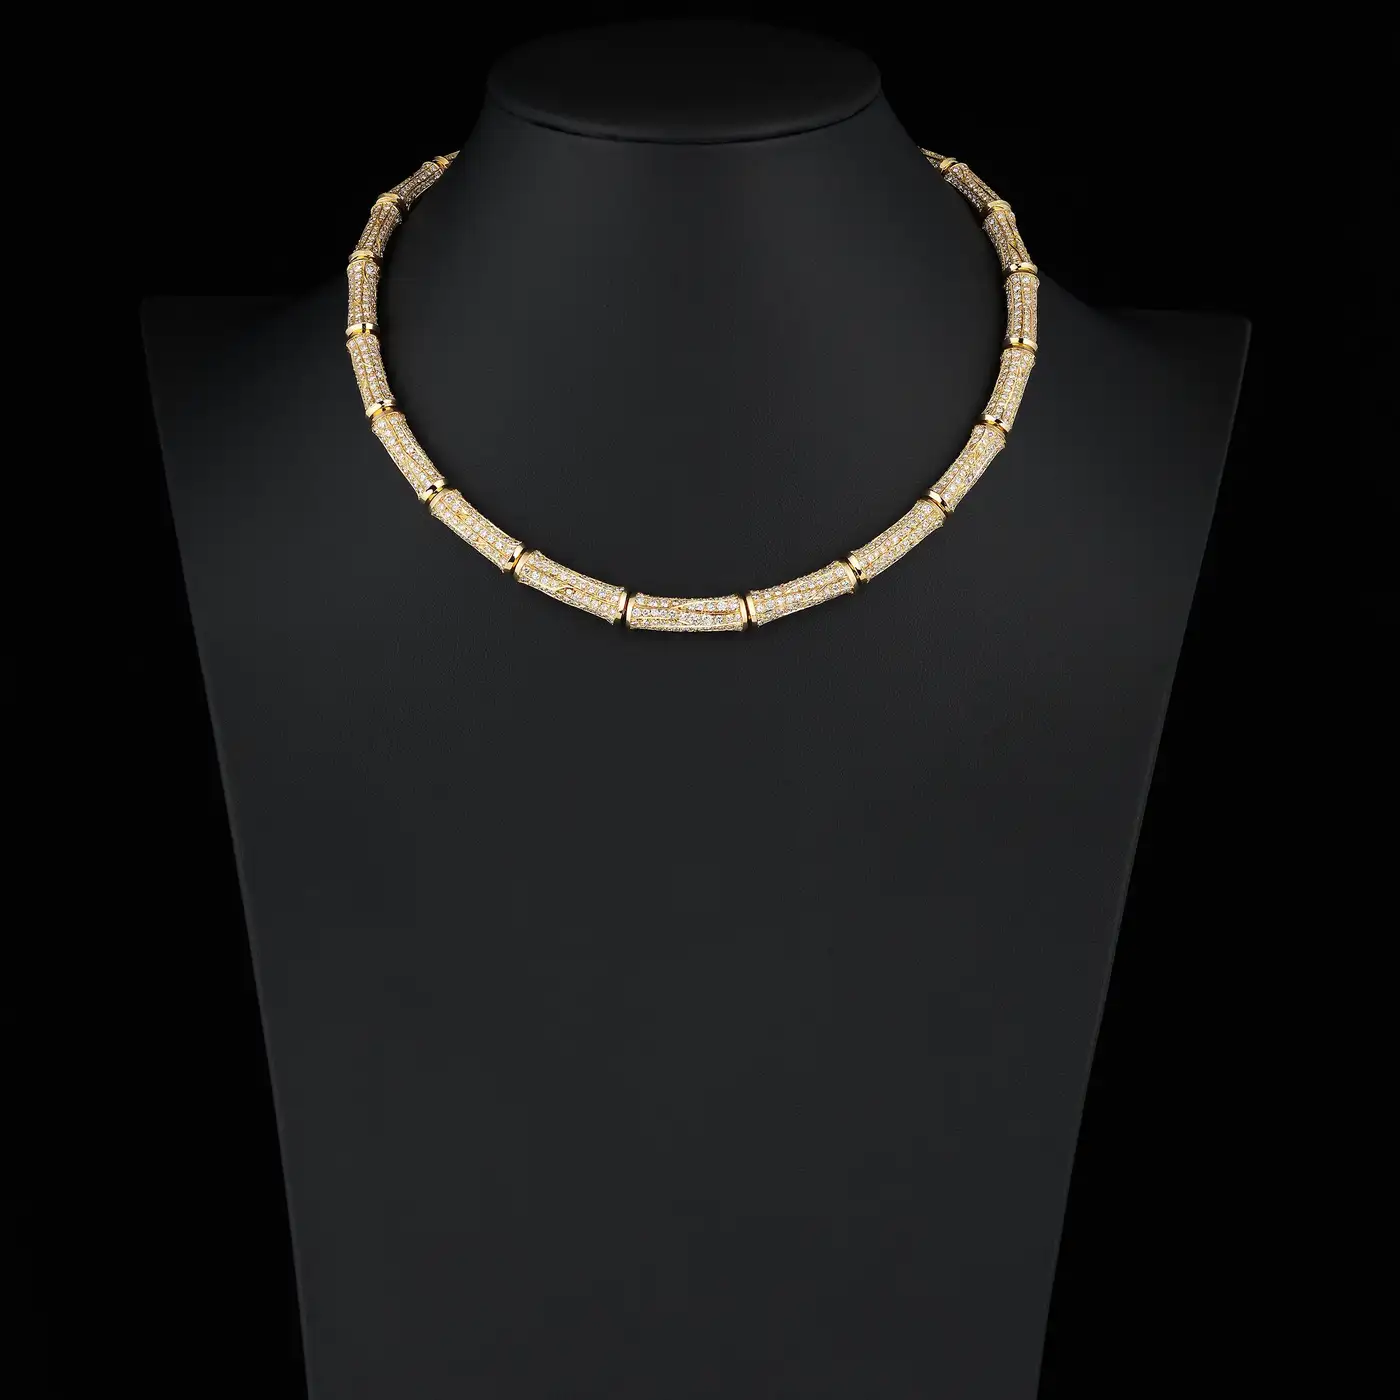 Cartier-26cts-Diamond-Bamboo-Suite-in-18K-Gold-Necklace-and-Earrings-7.webp